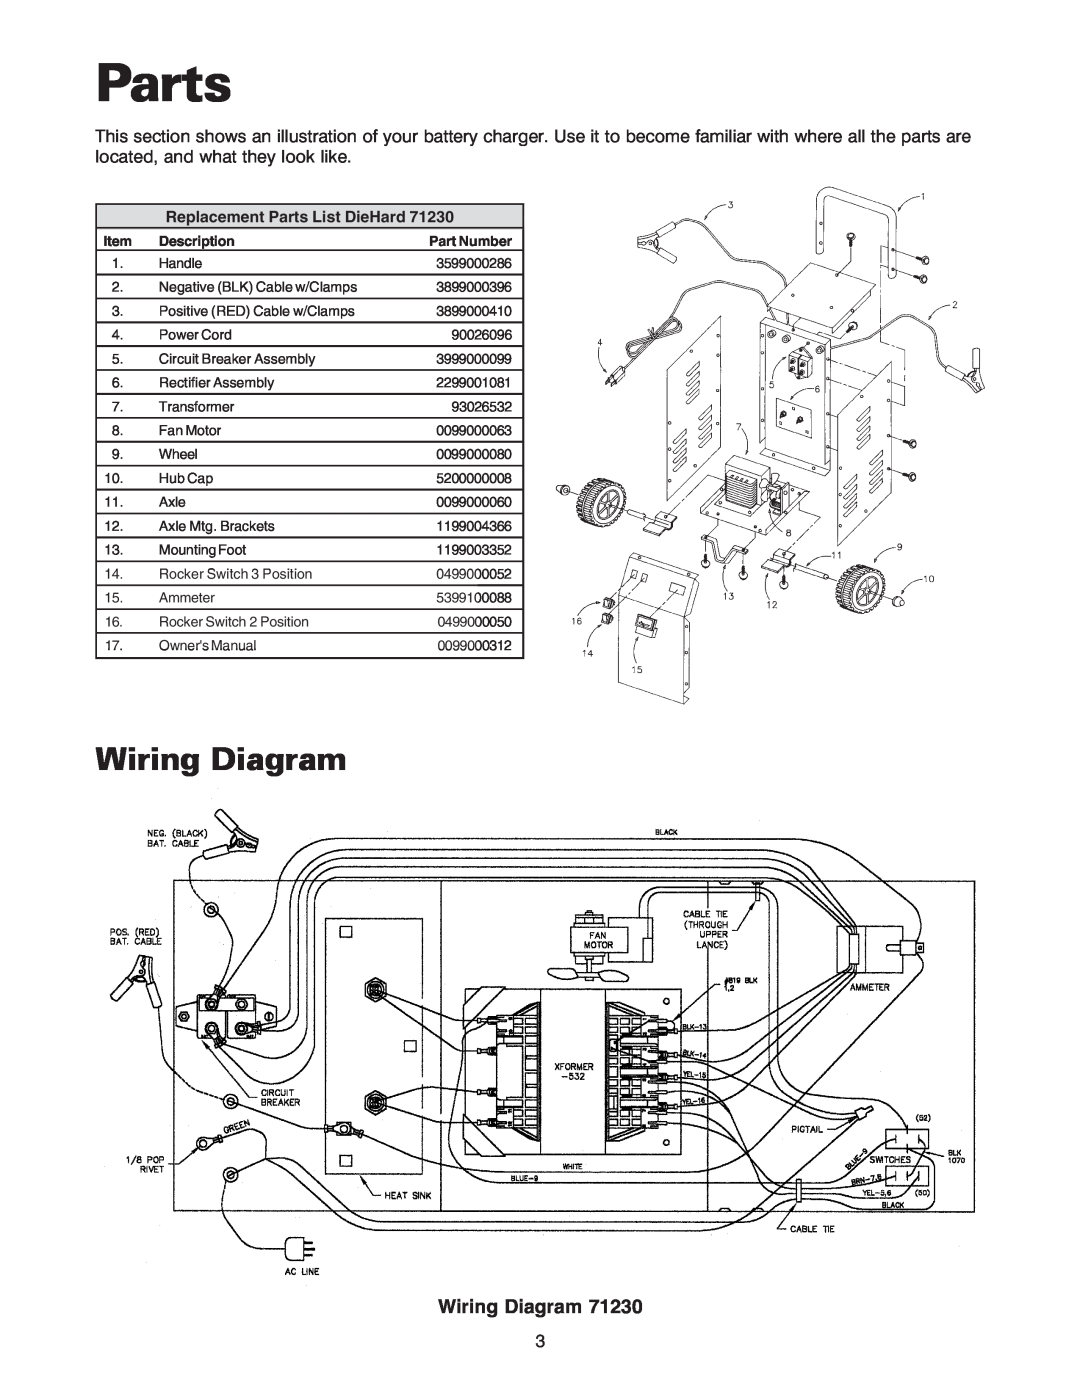 Sears 200.71231 owner manual Parts, Wiring Diagram, Description, Part Number 